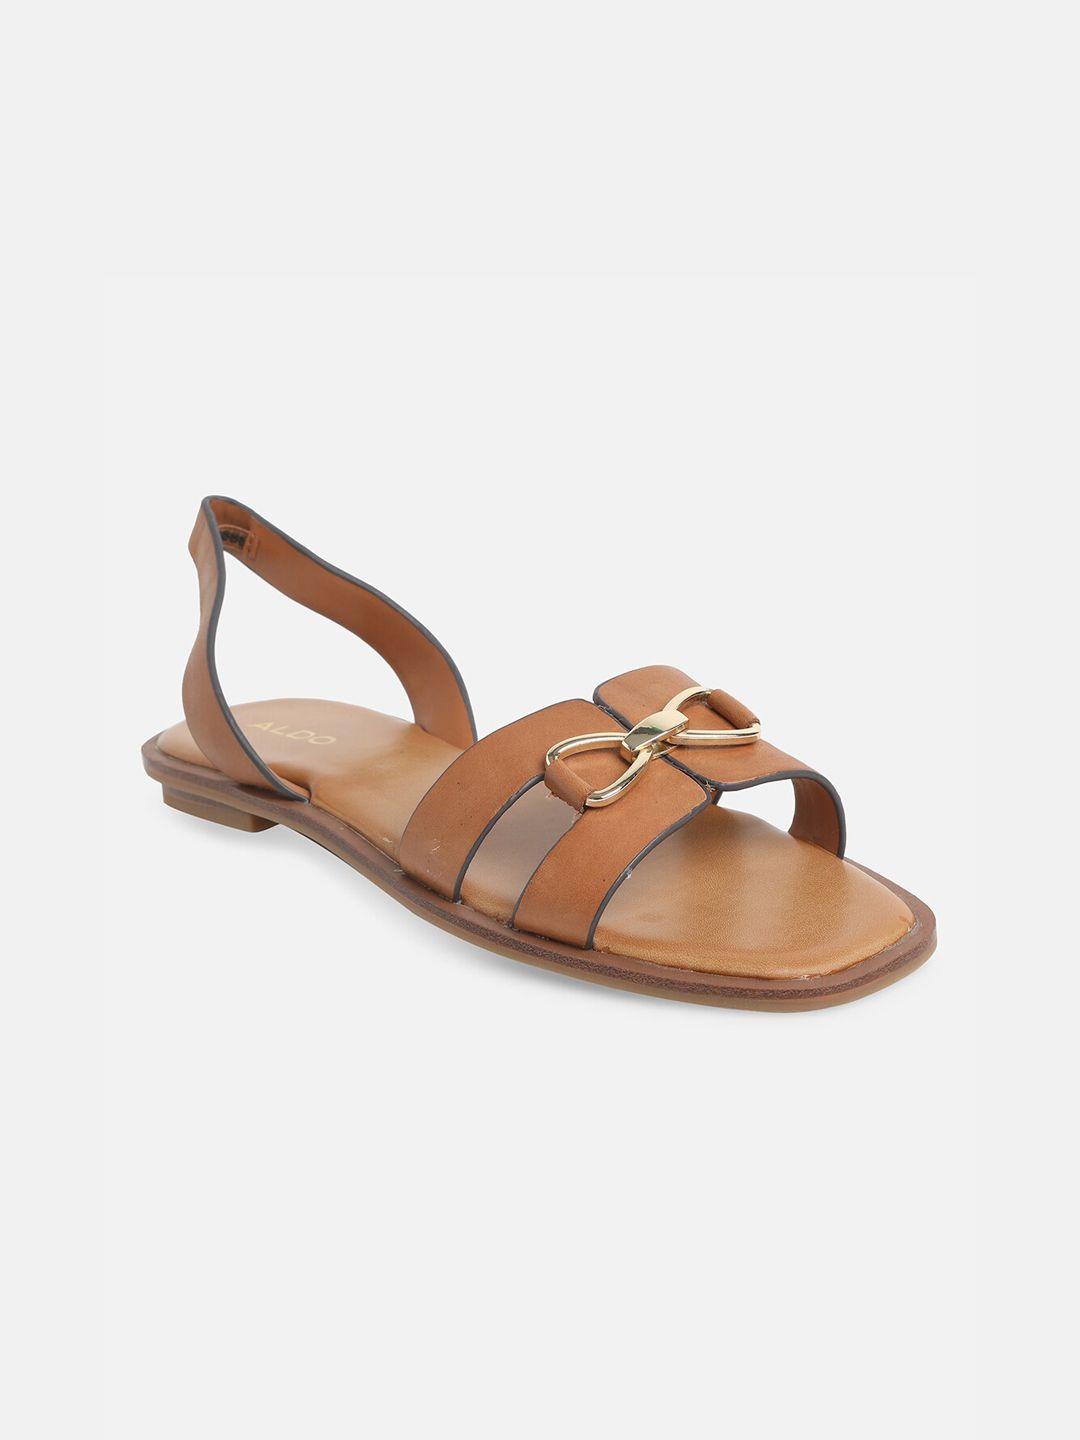 aldo women brown embellished open toe flats with bows